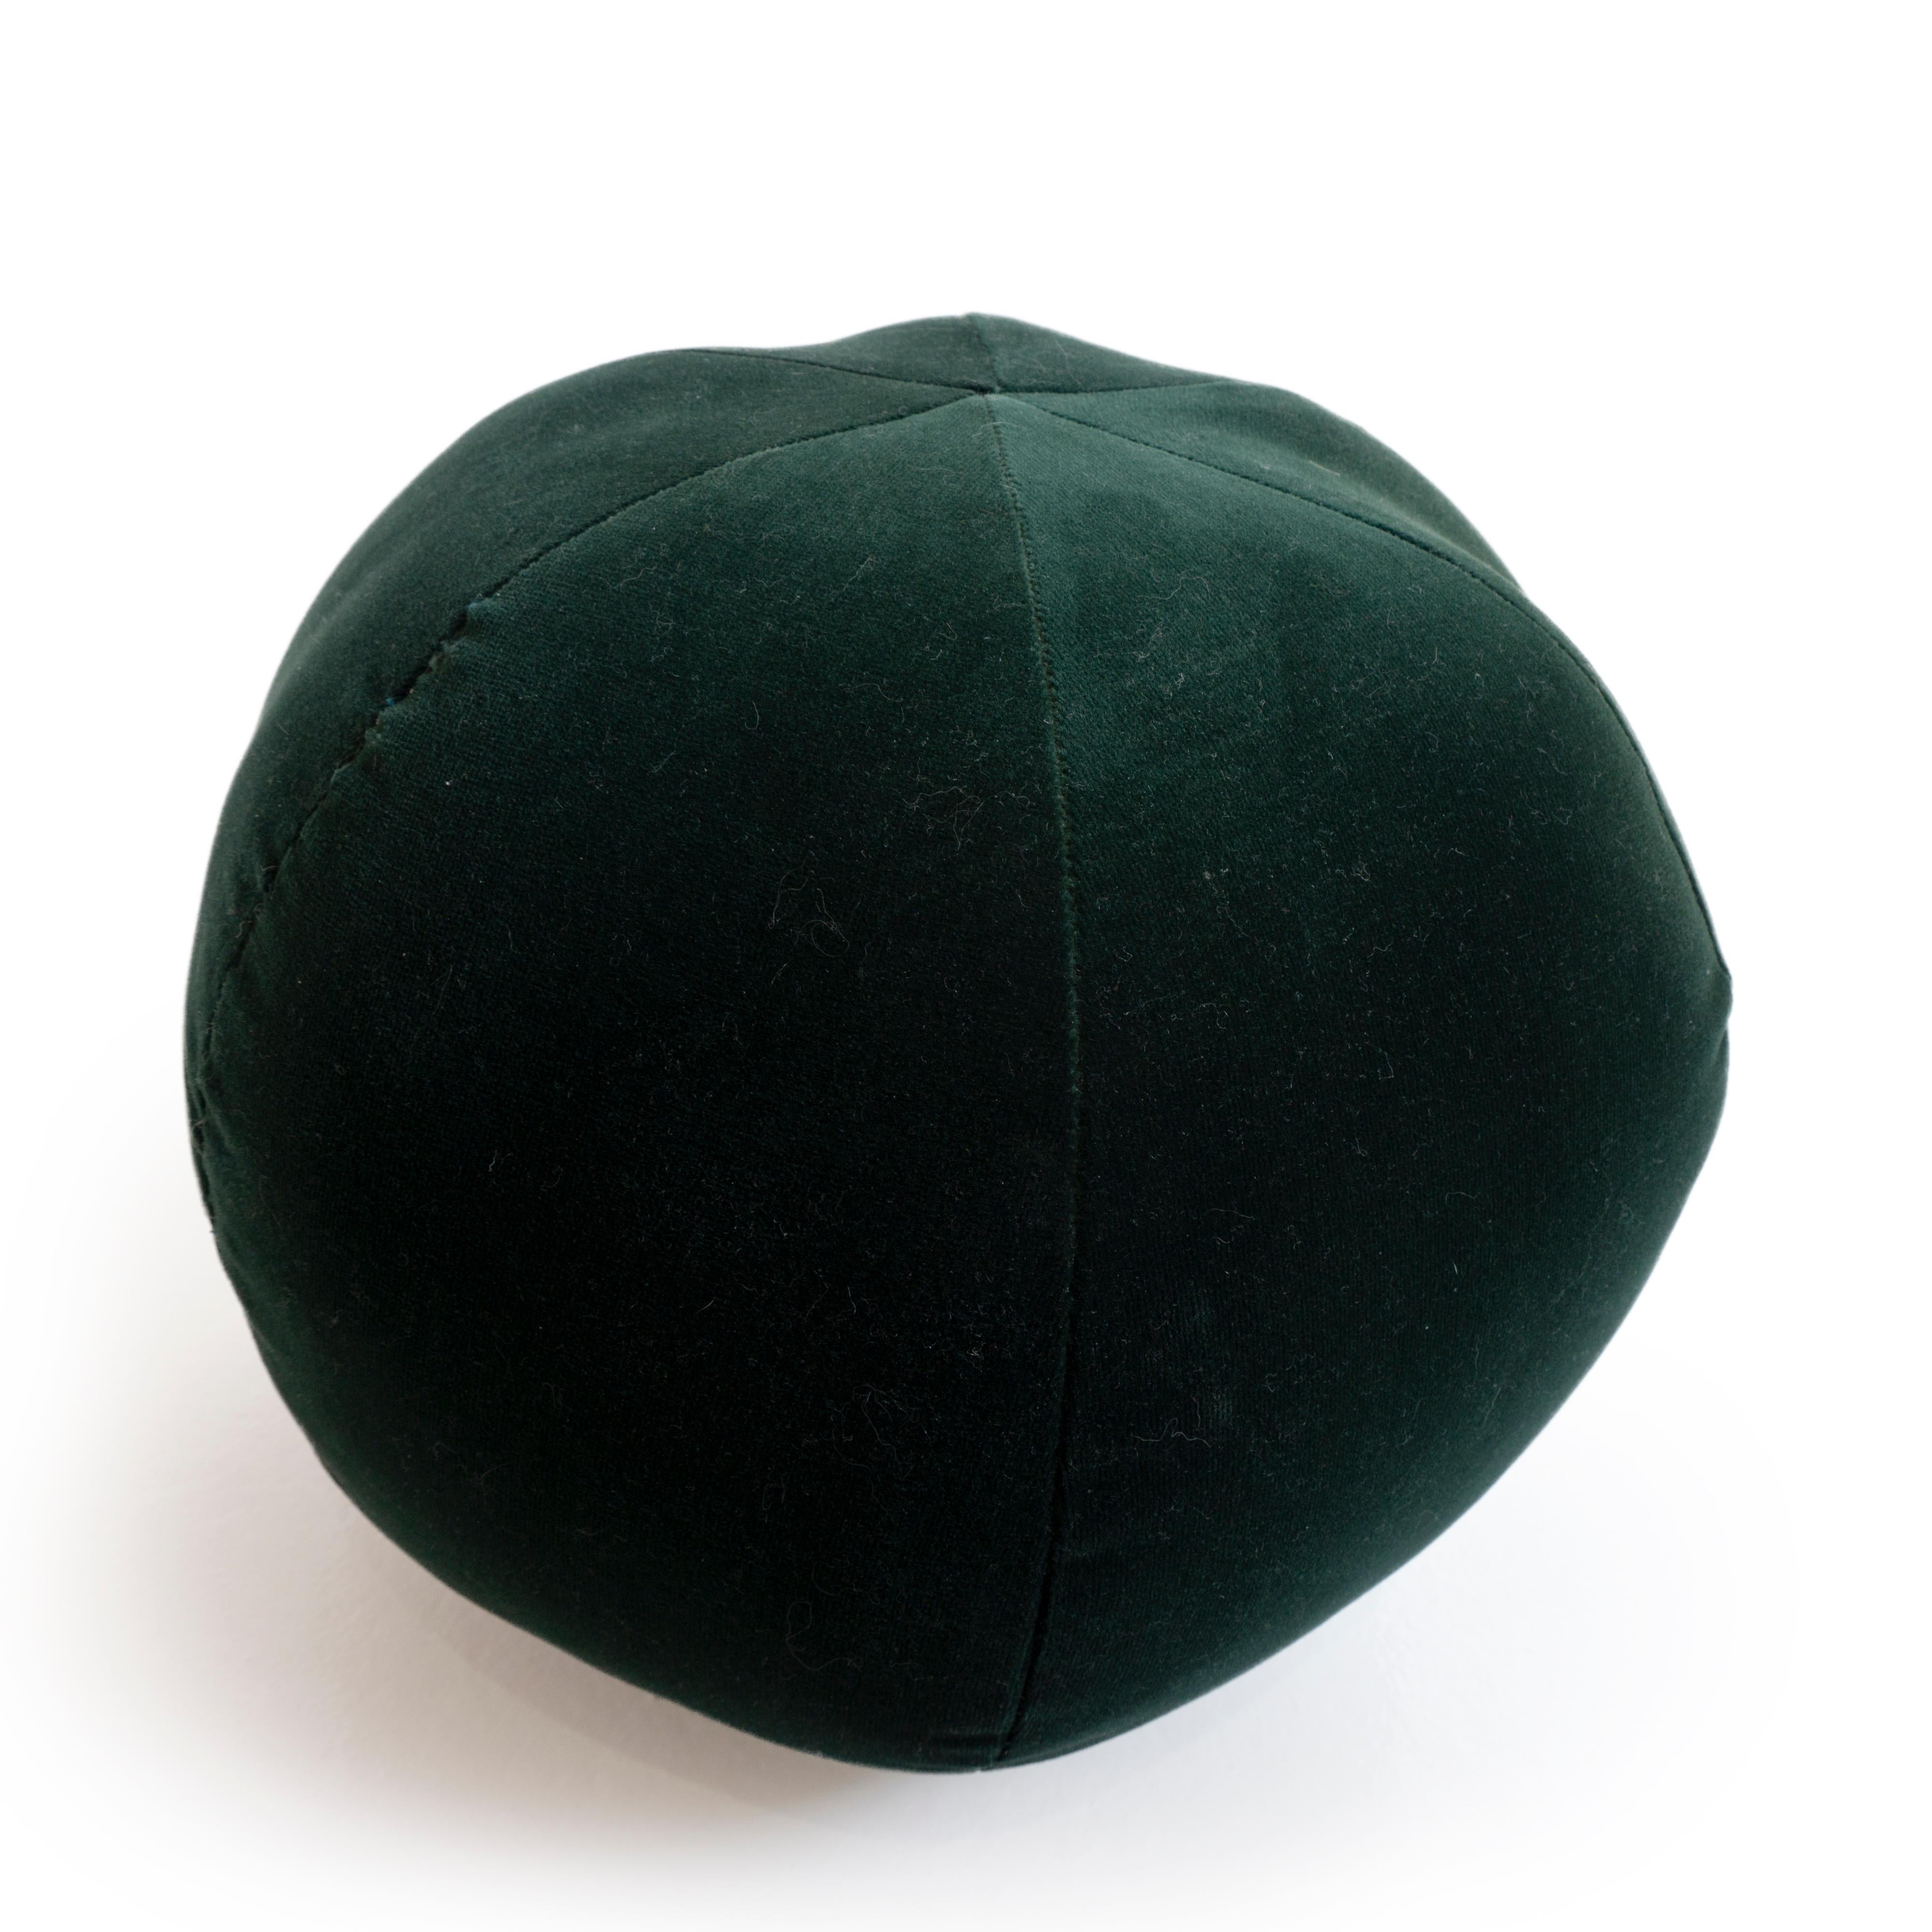 This round ball throw pillow was hand sewn at studio in Norwalk, CT. The pillow is made with a soft forest green velvet.

Measurements: 9